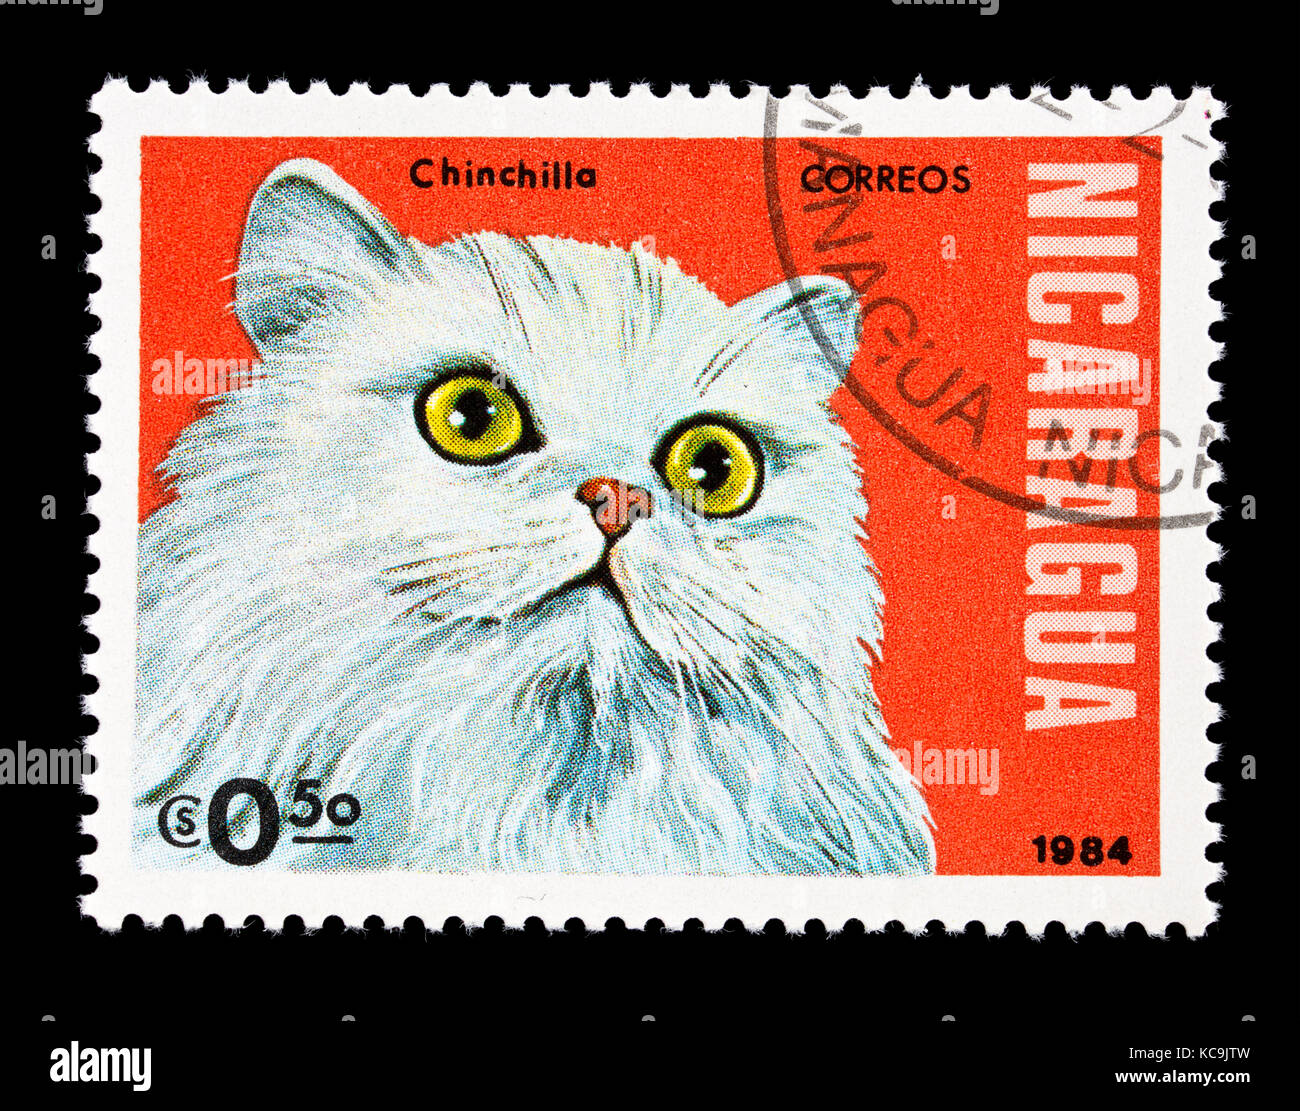 Postage stamp from Nicaragua depicting a chinchilla breed of house cat. Stock Photo